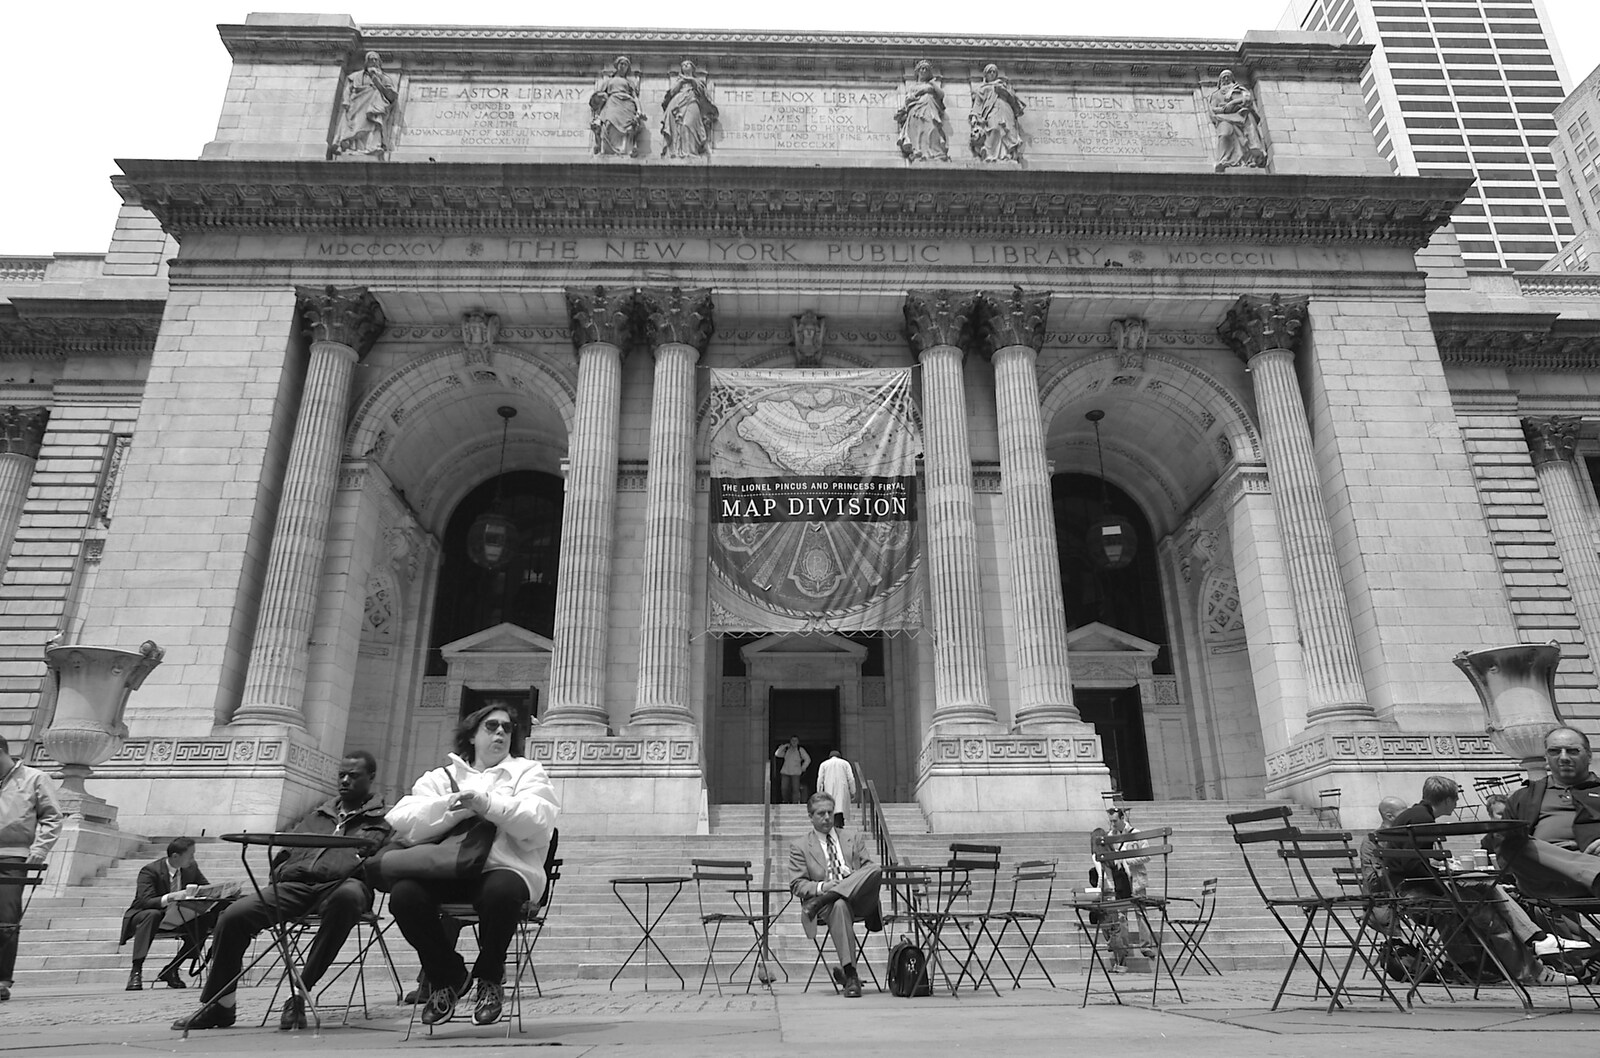 The grand entrance to New York Public Library from A Union Square Demo, Bryant Park and Columbus Circle, New York, US - 2nd May 2006